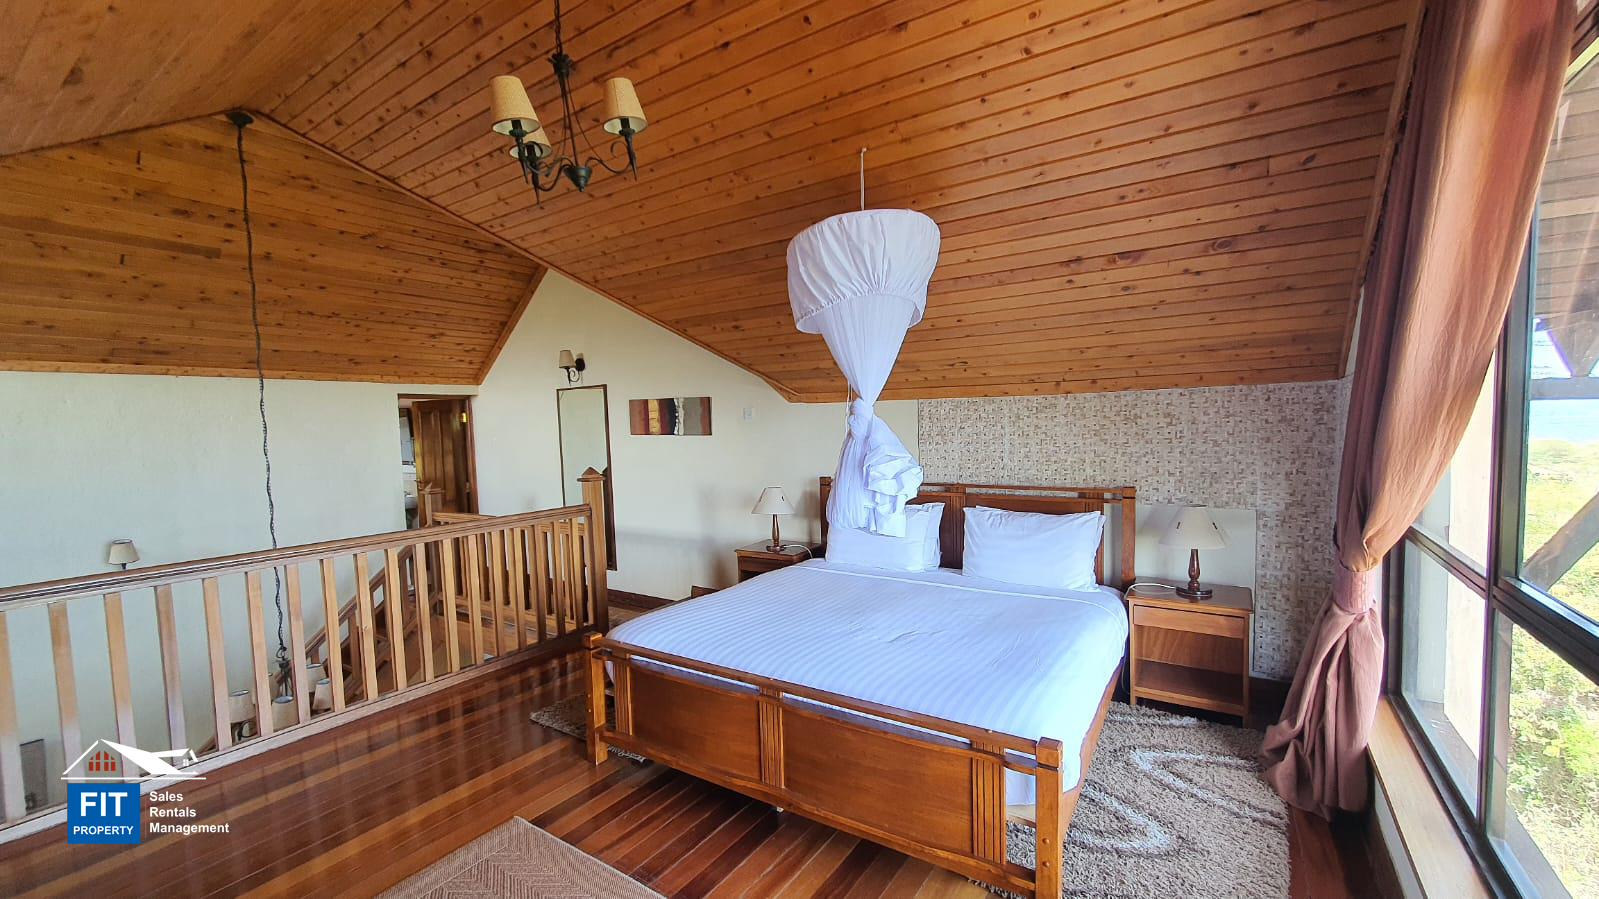 Villa for Sale, Great Rift Valley Lodge, Naivasha. This bright and airy villa has 3 bedrooms all En-suite and features hard wood floors. FIT PROPERTY